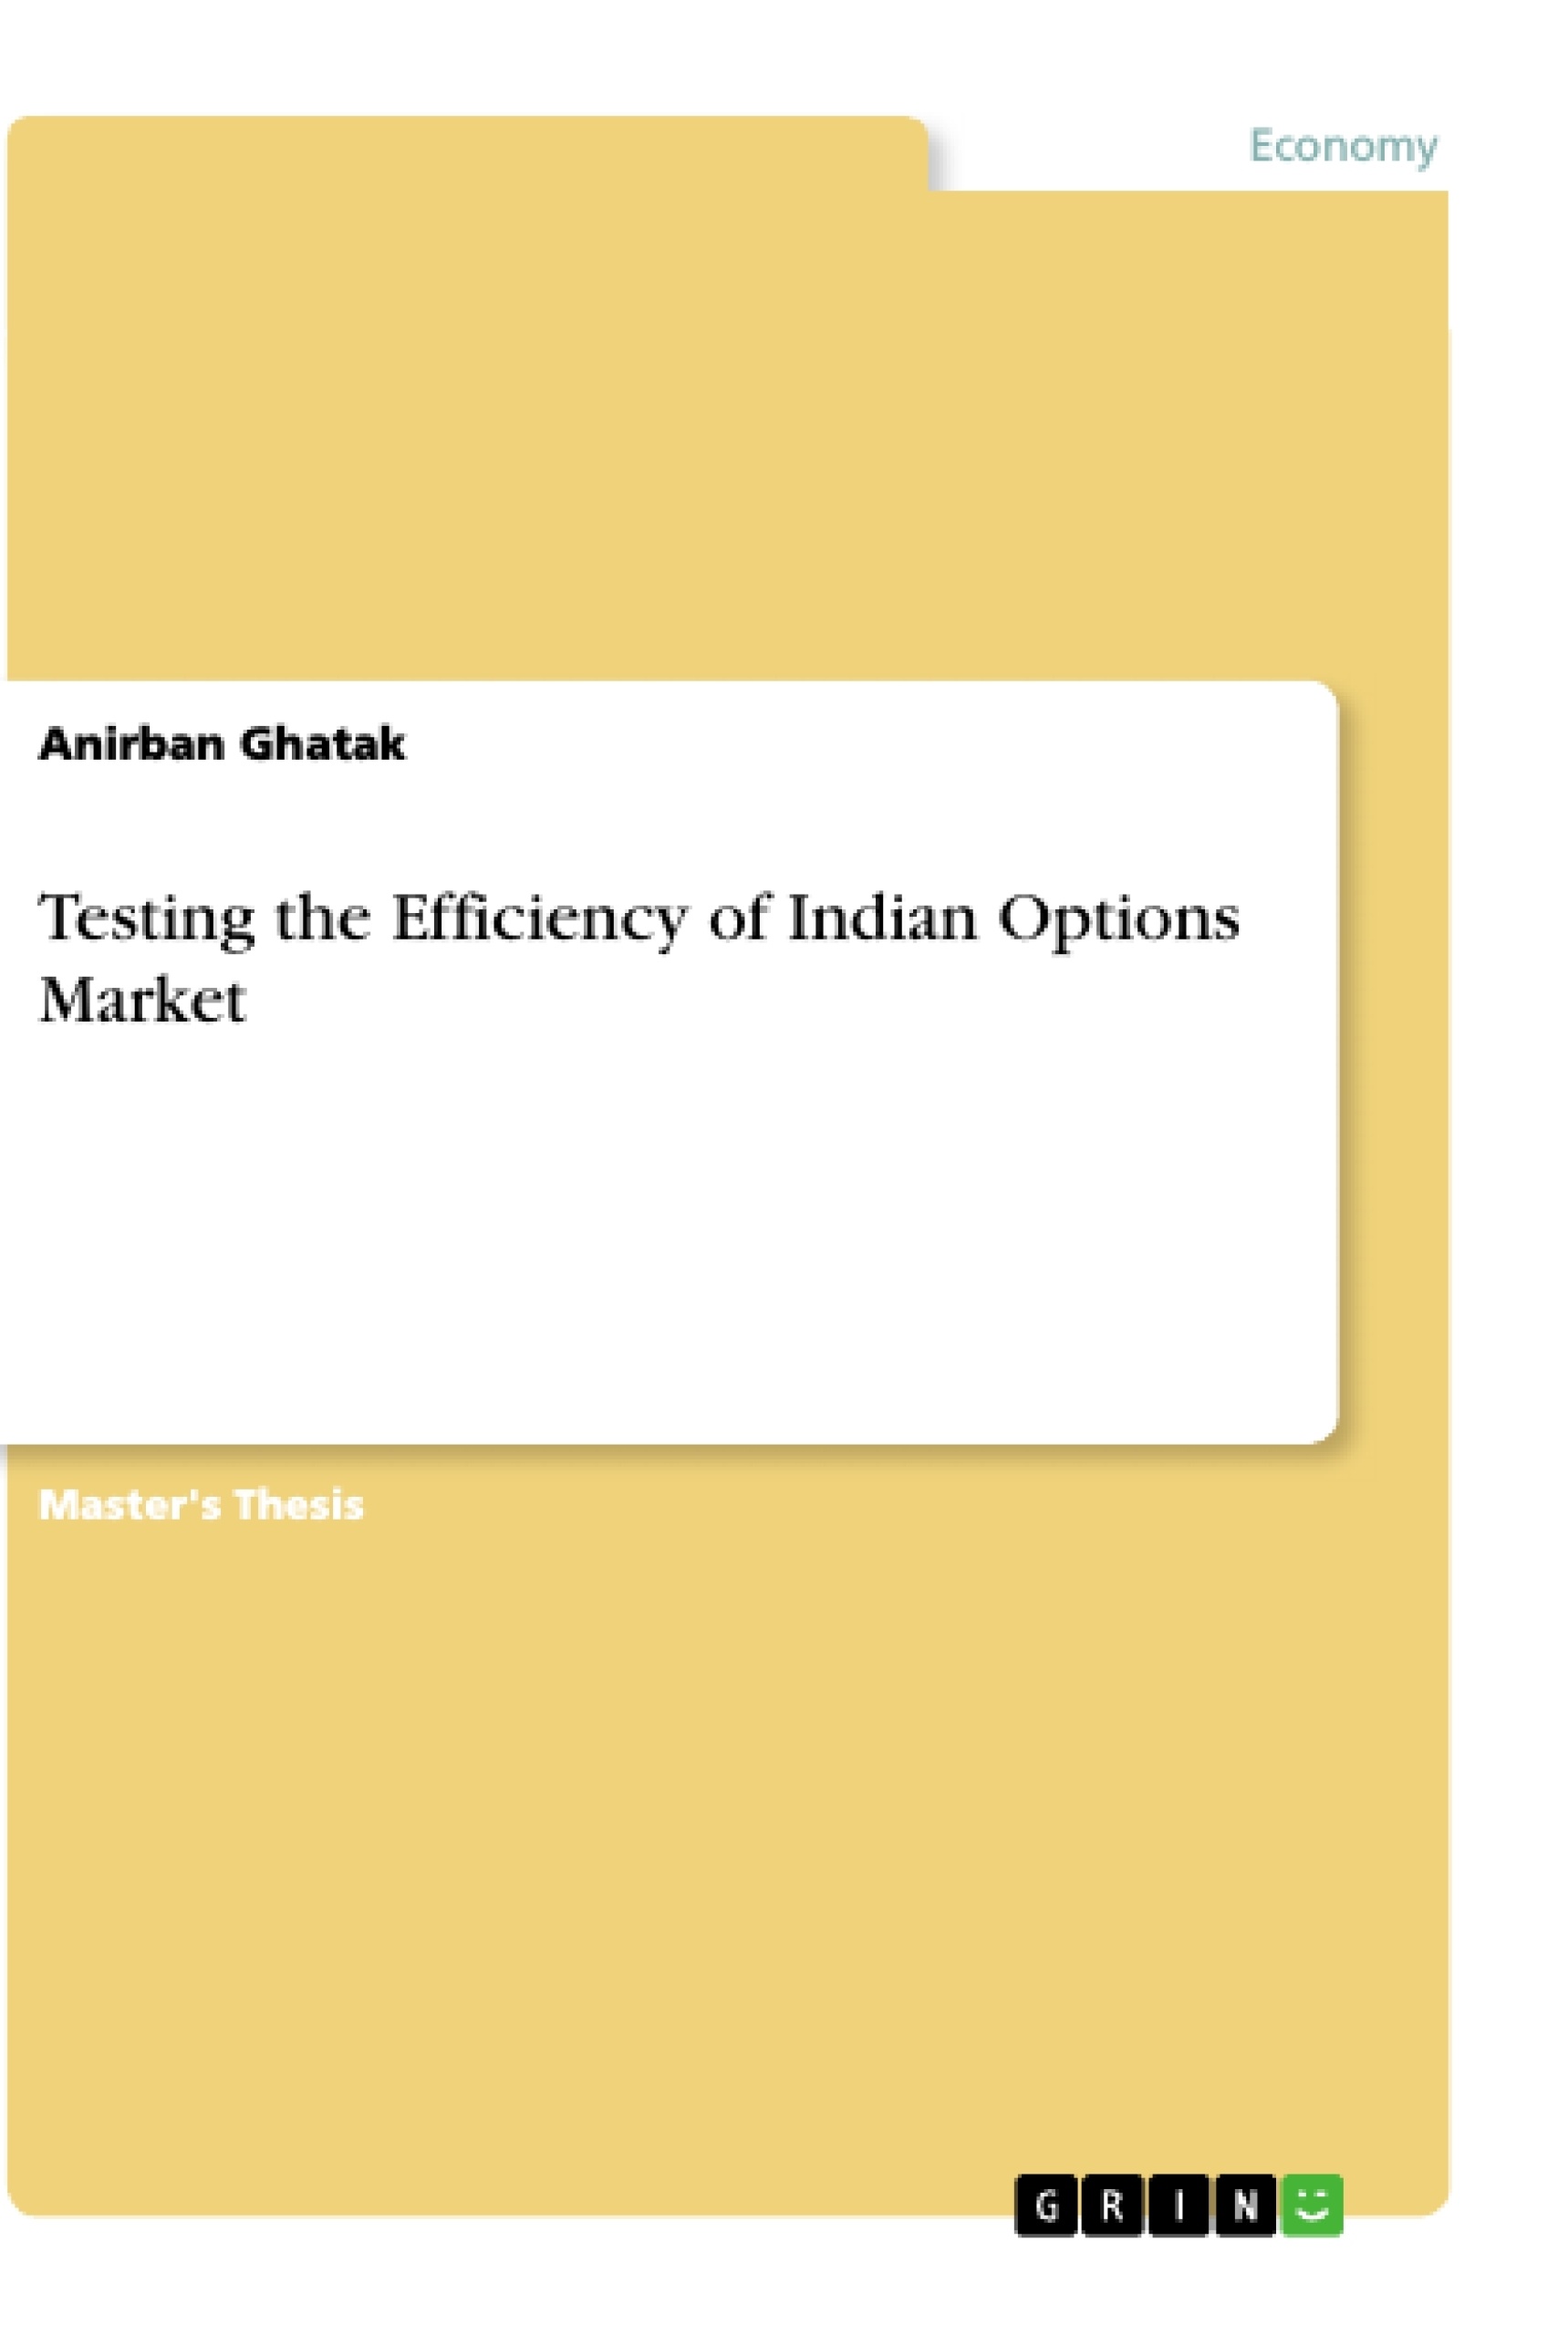 Titre: Testing the Efficiency of Indian Options Market